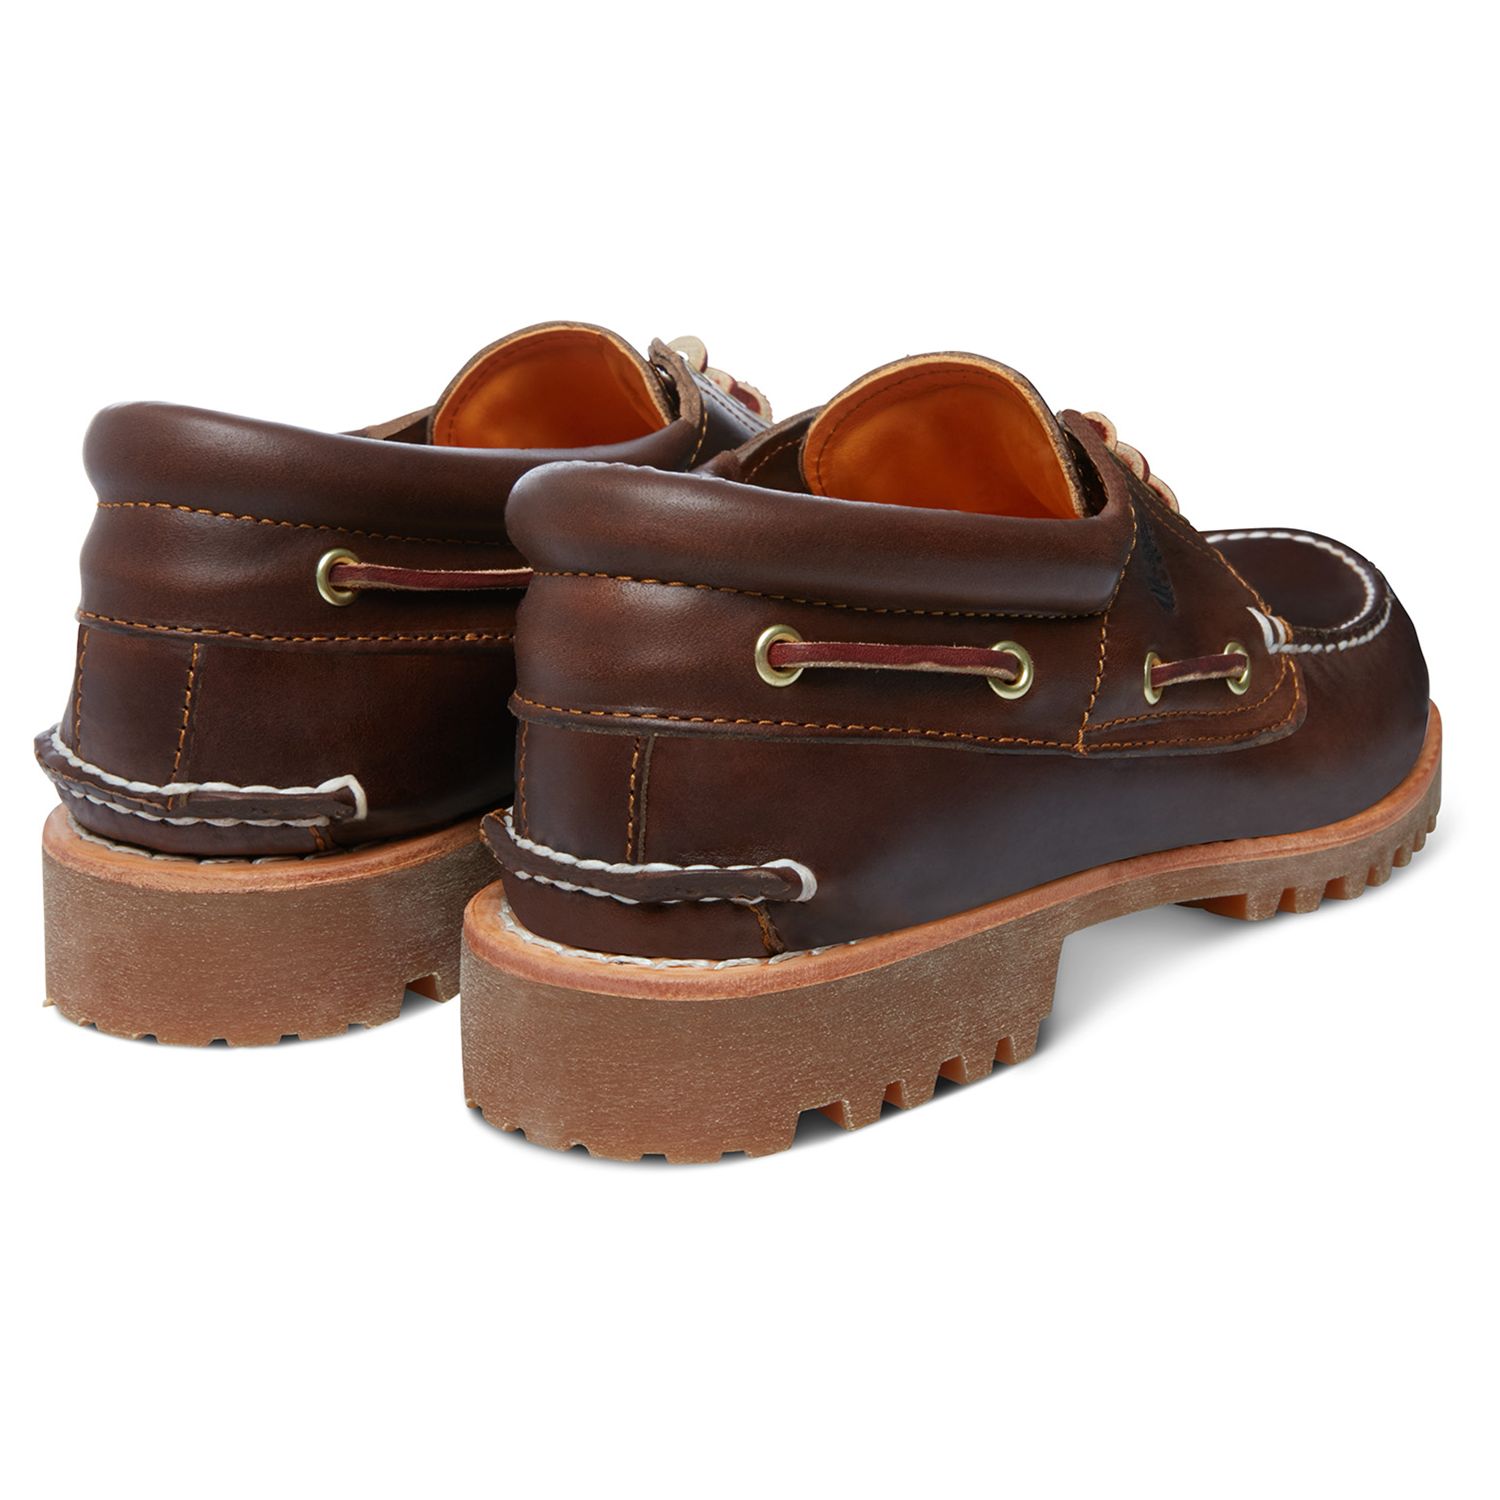 Timberland Handsewn Boat Shoes, Brown